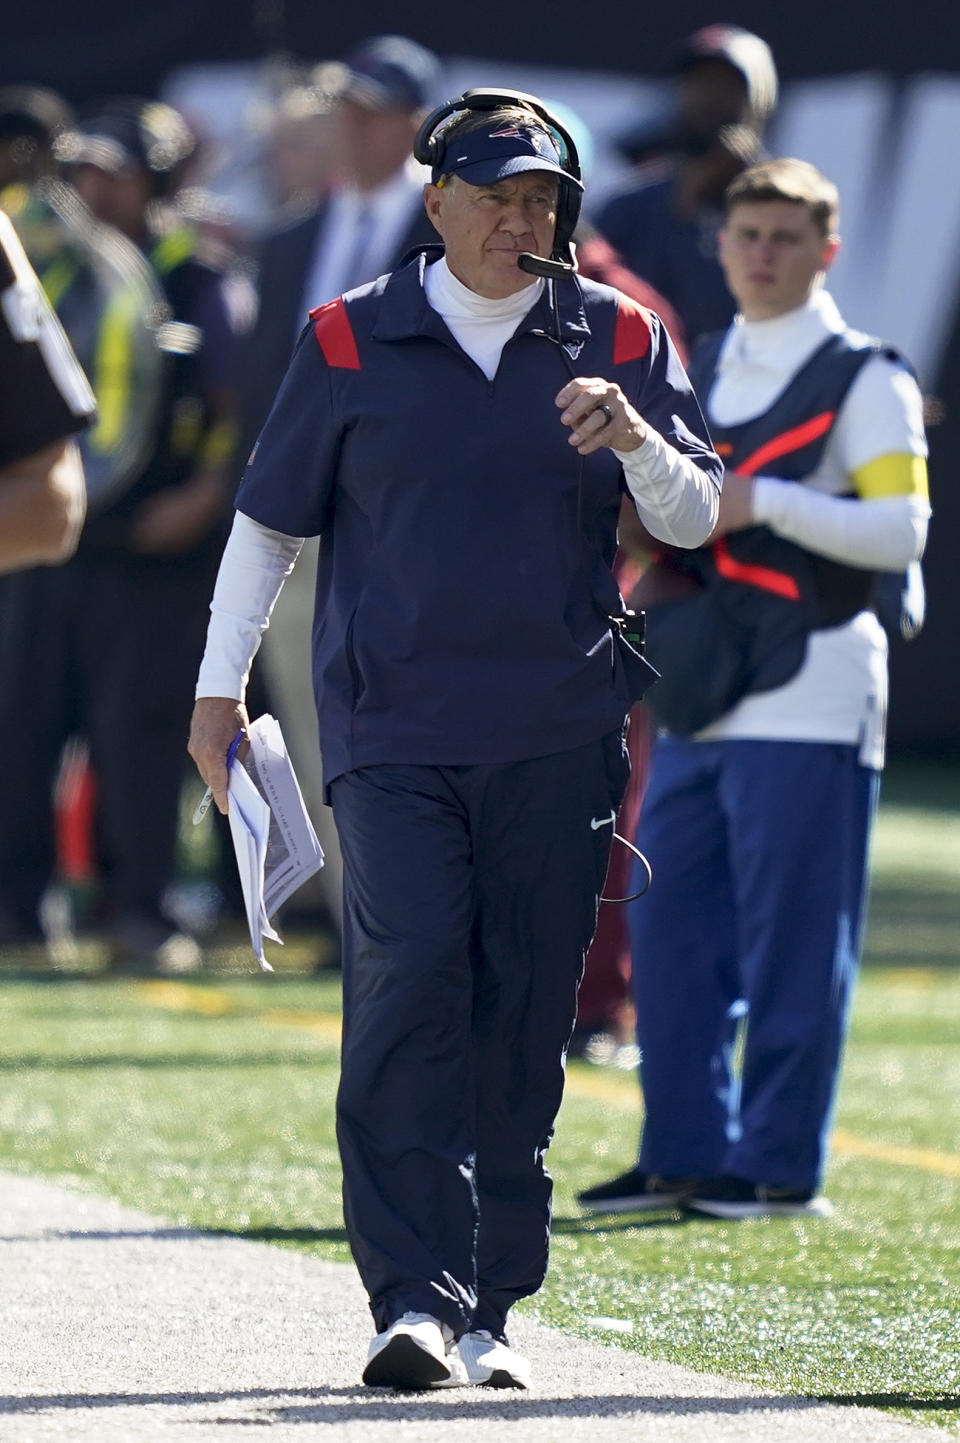 New England Patriots head coach Bill Belichick walks the sidelines during the second quarter of an NFL football game between the New York Jets and the New England Patriots, Sunday, Oct. 30, 2022, in New York. (AP Photo/John Minchillo)